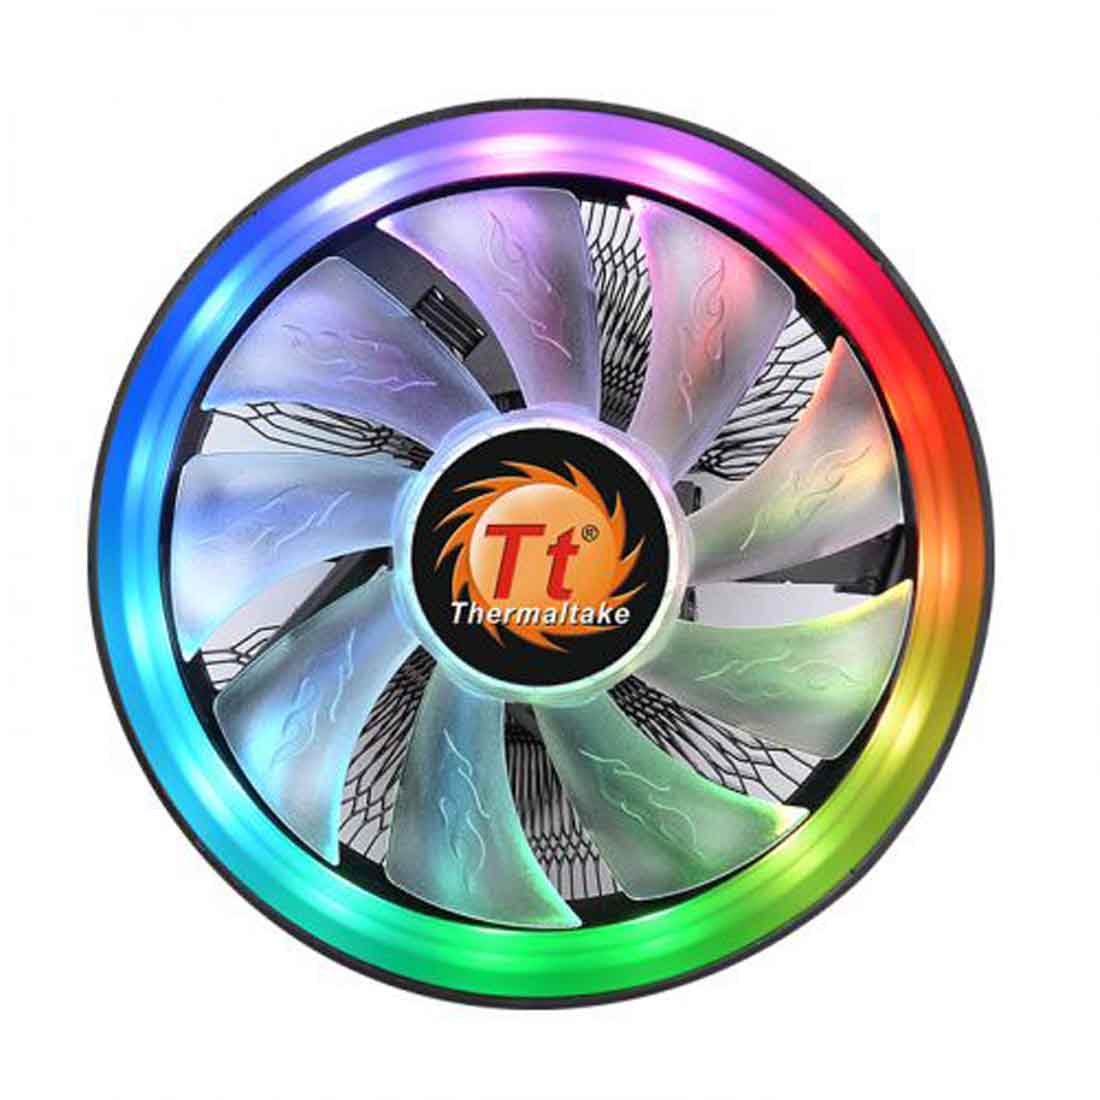 [Repacked]Thermaltake UX100 ARGB Lighting CPU Cooler with 16.8 million colors of ARGB LED